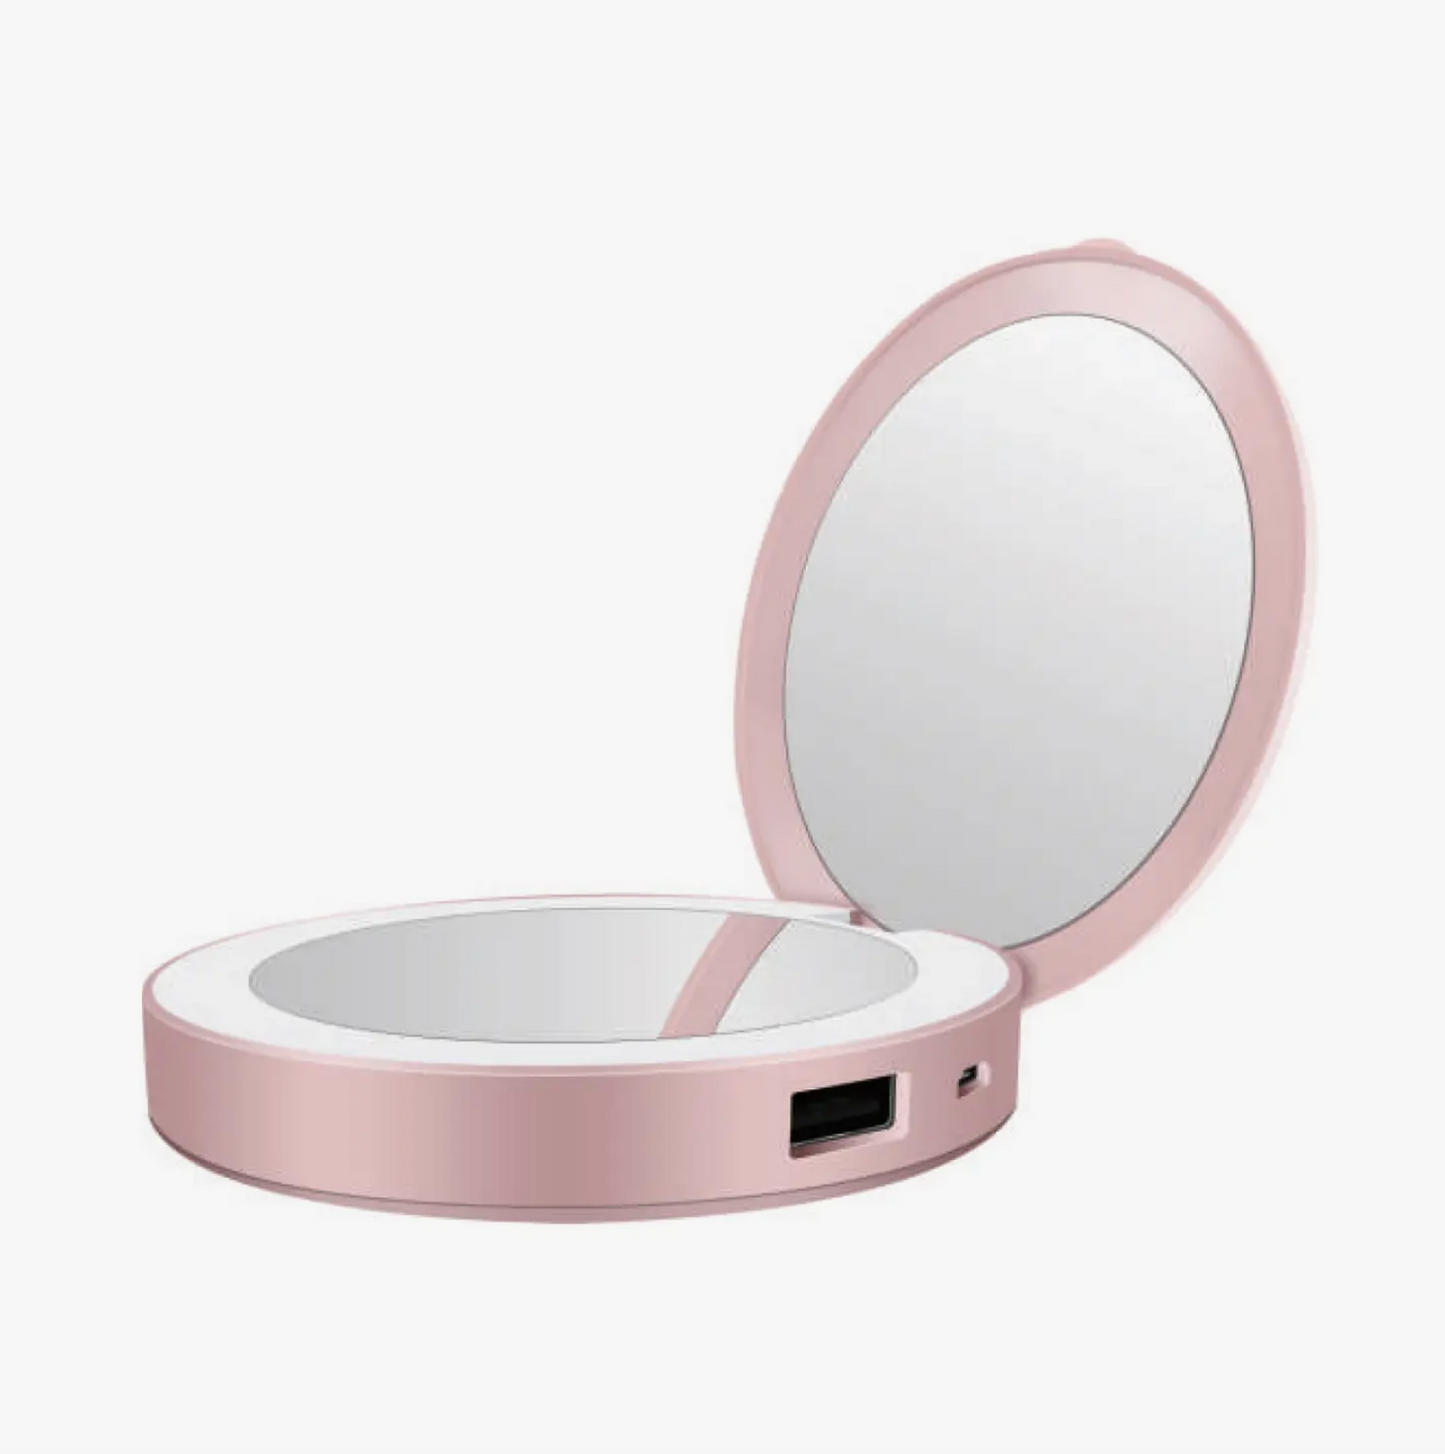 GLOW UP Light Up Mirror Compact/Power Bank